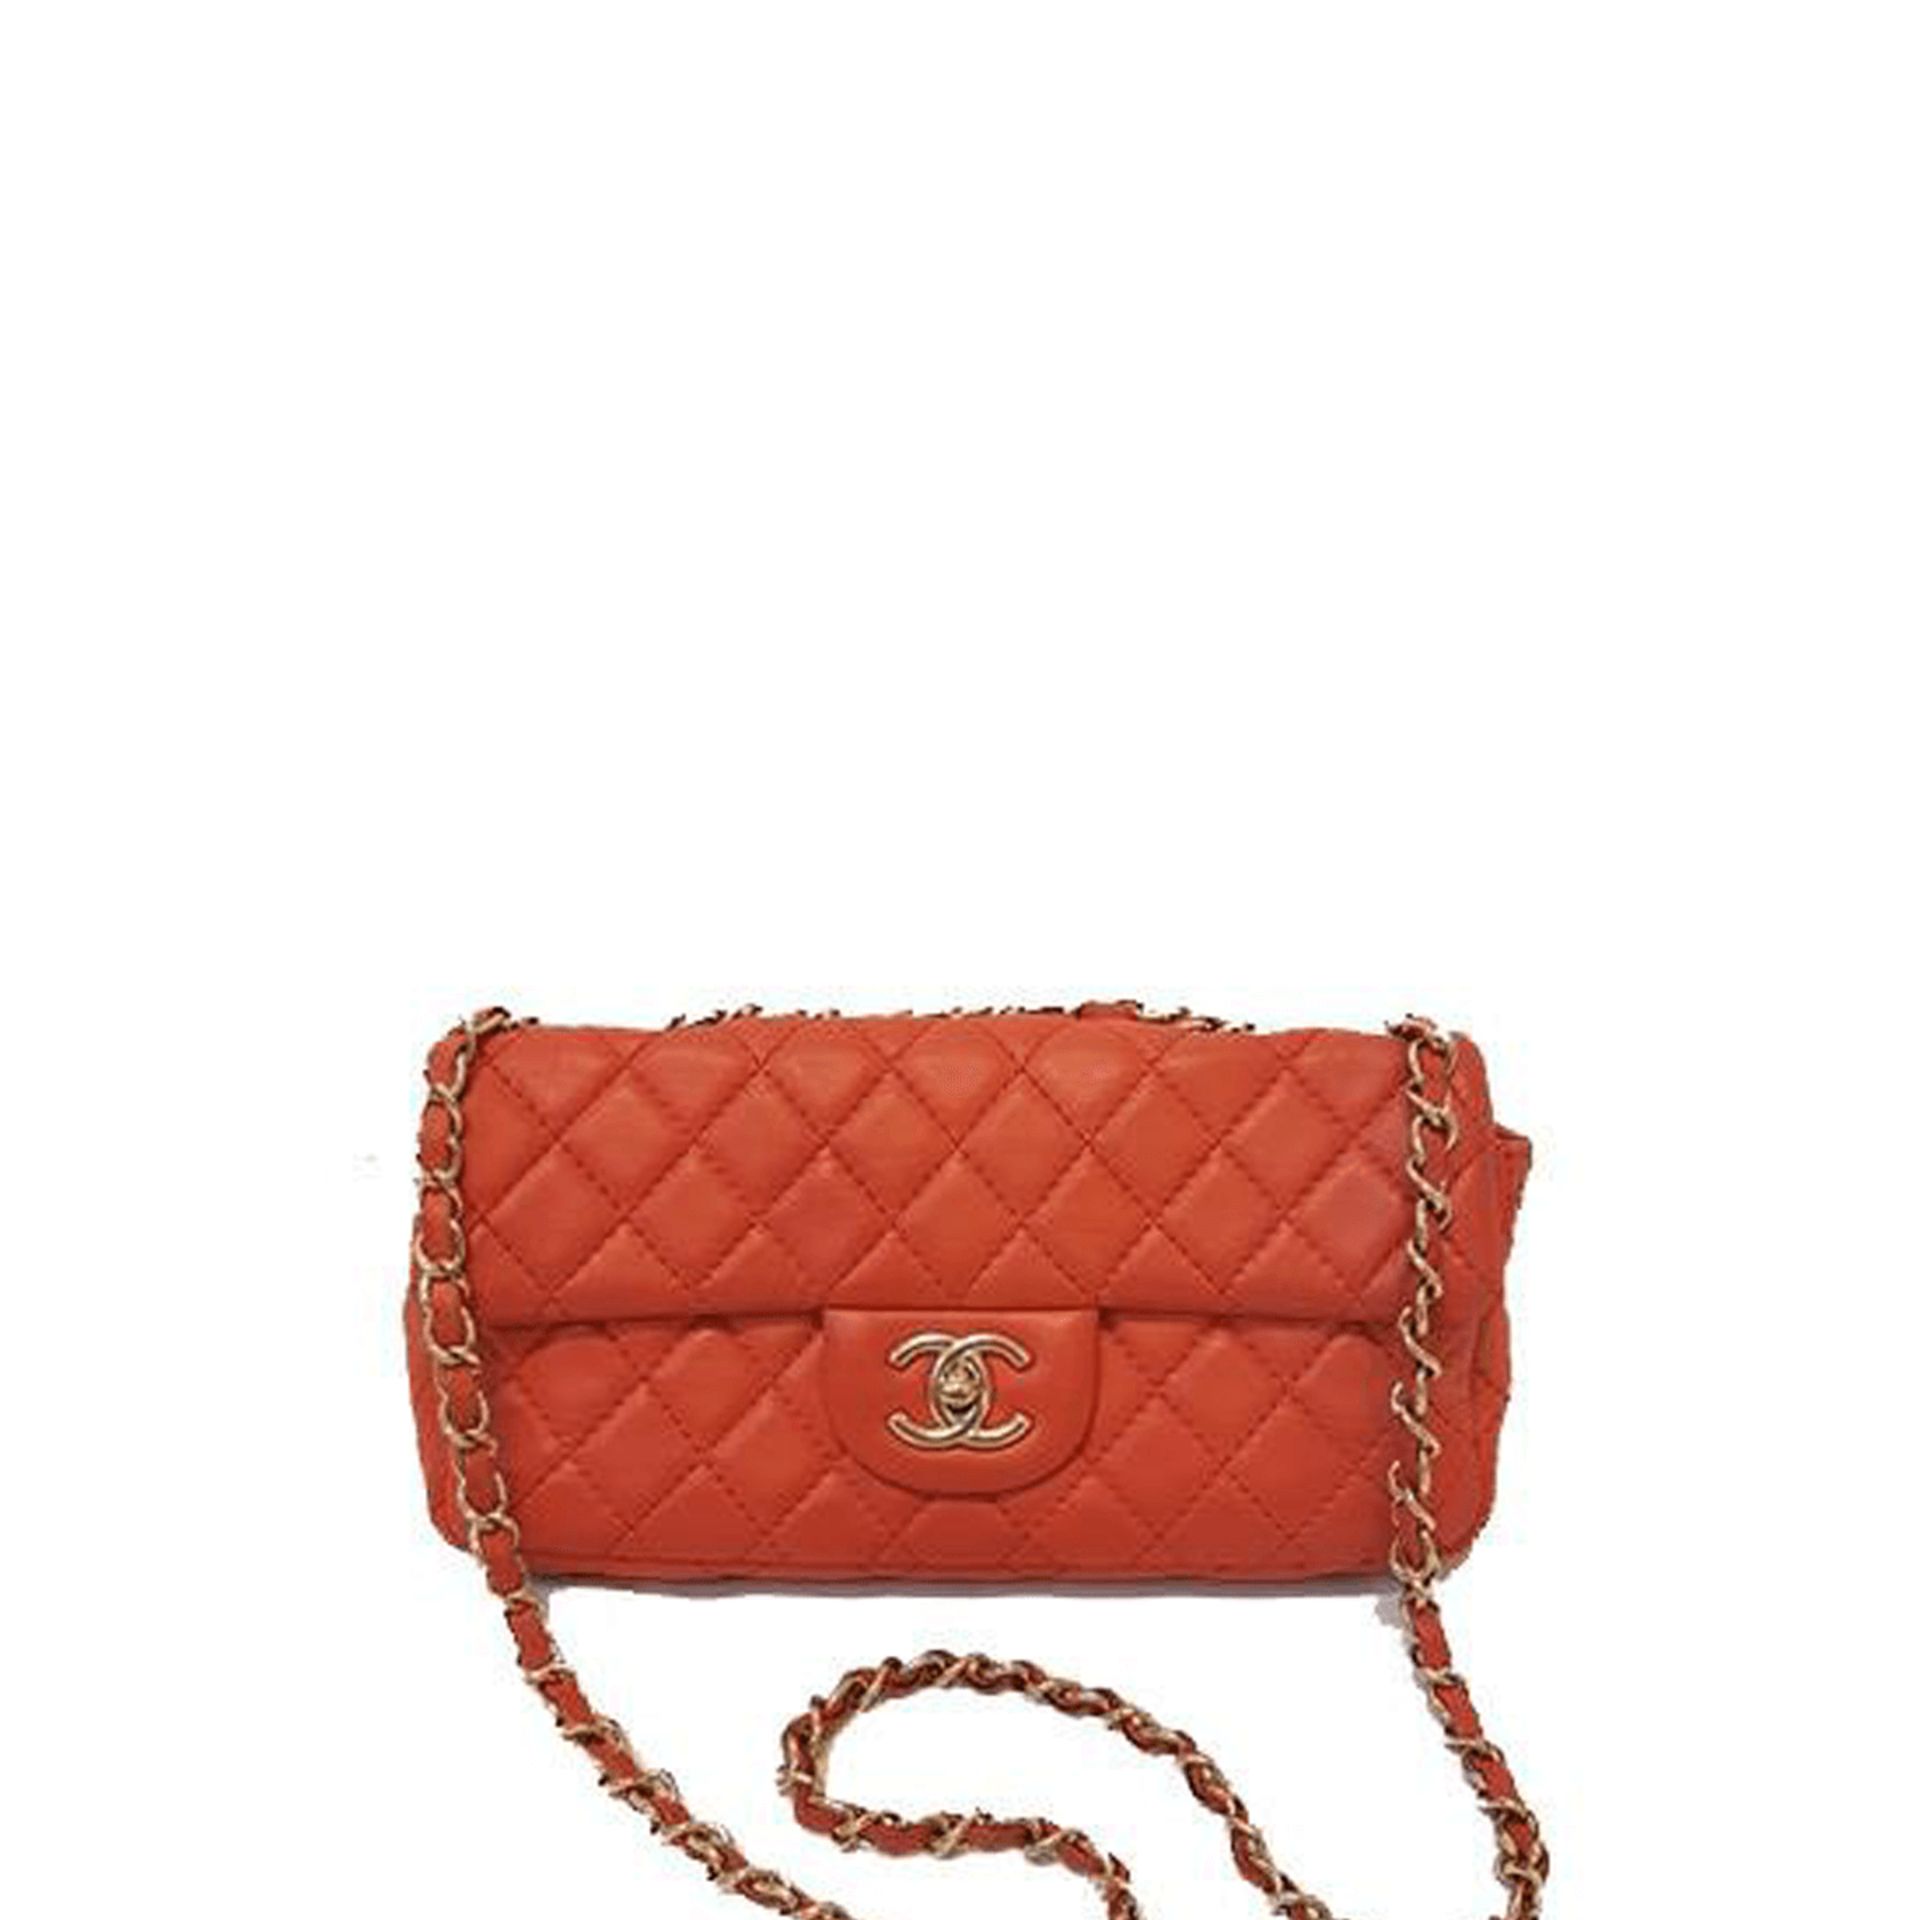 Chanel Classic Flap Bag In Red Leather With A Rectangular Shape